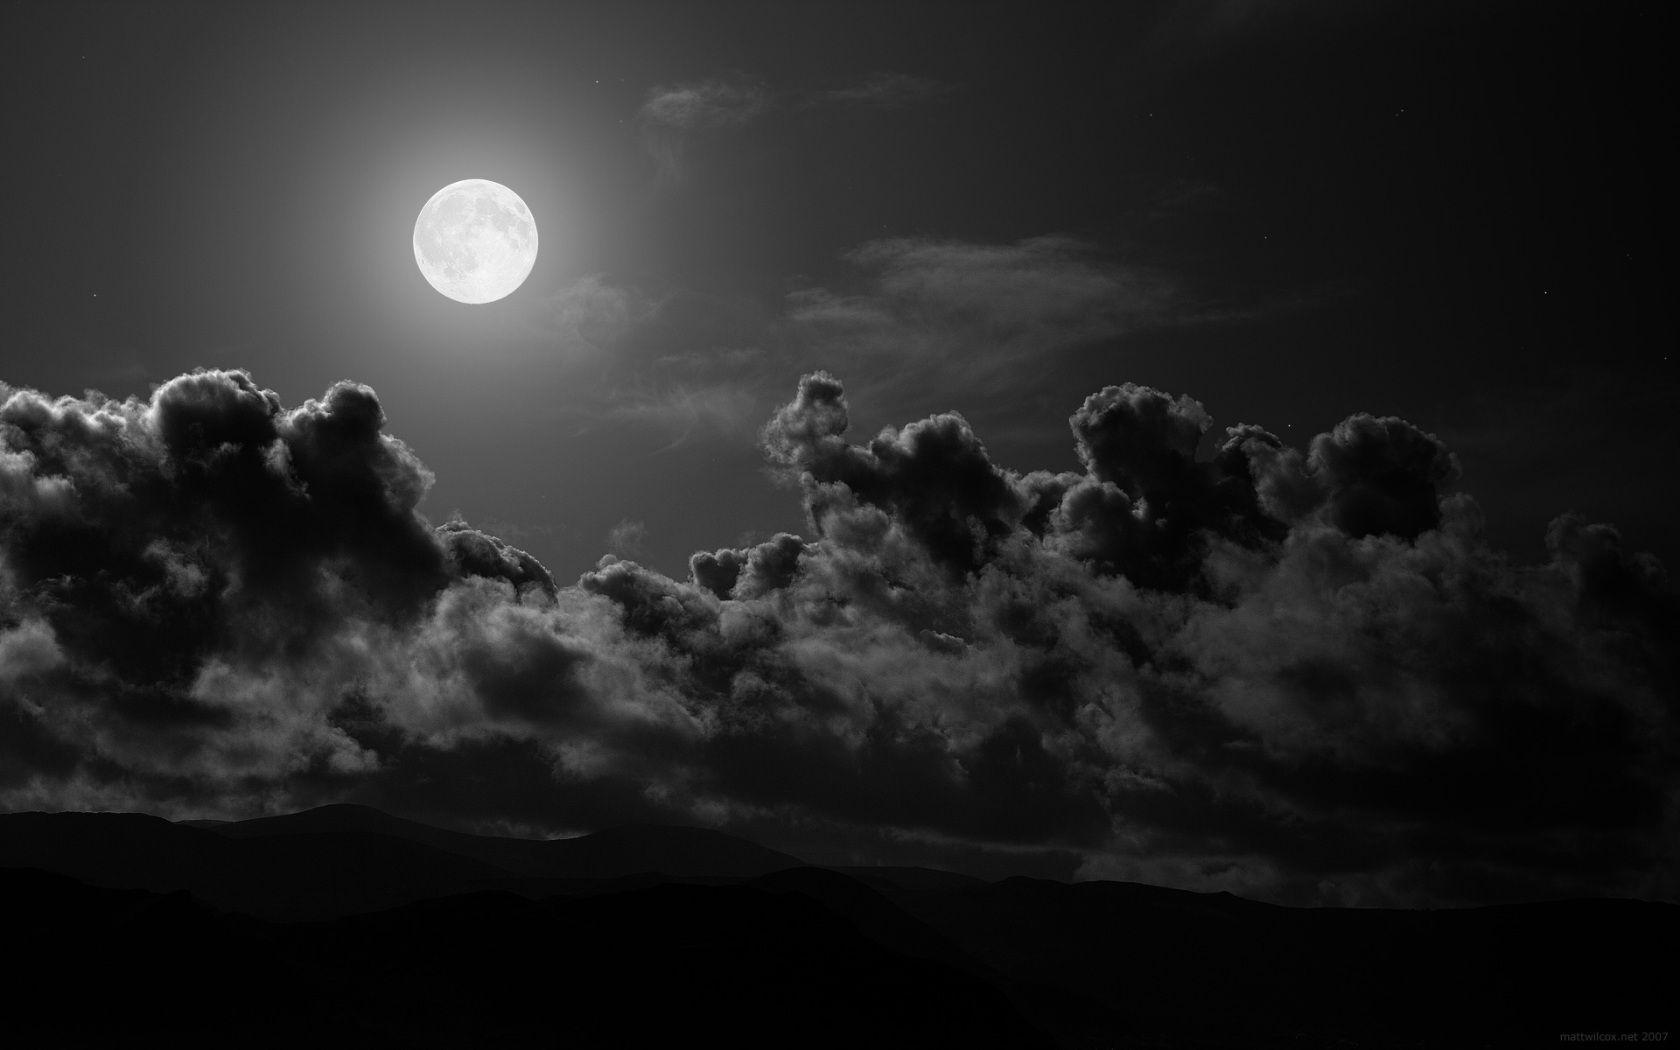 Moonlight night wallpaper and image, picture, photo